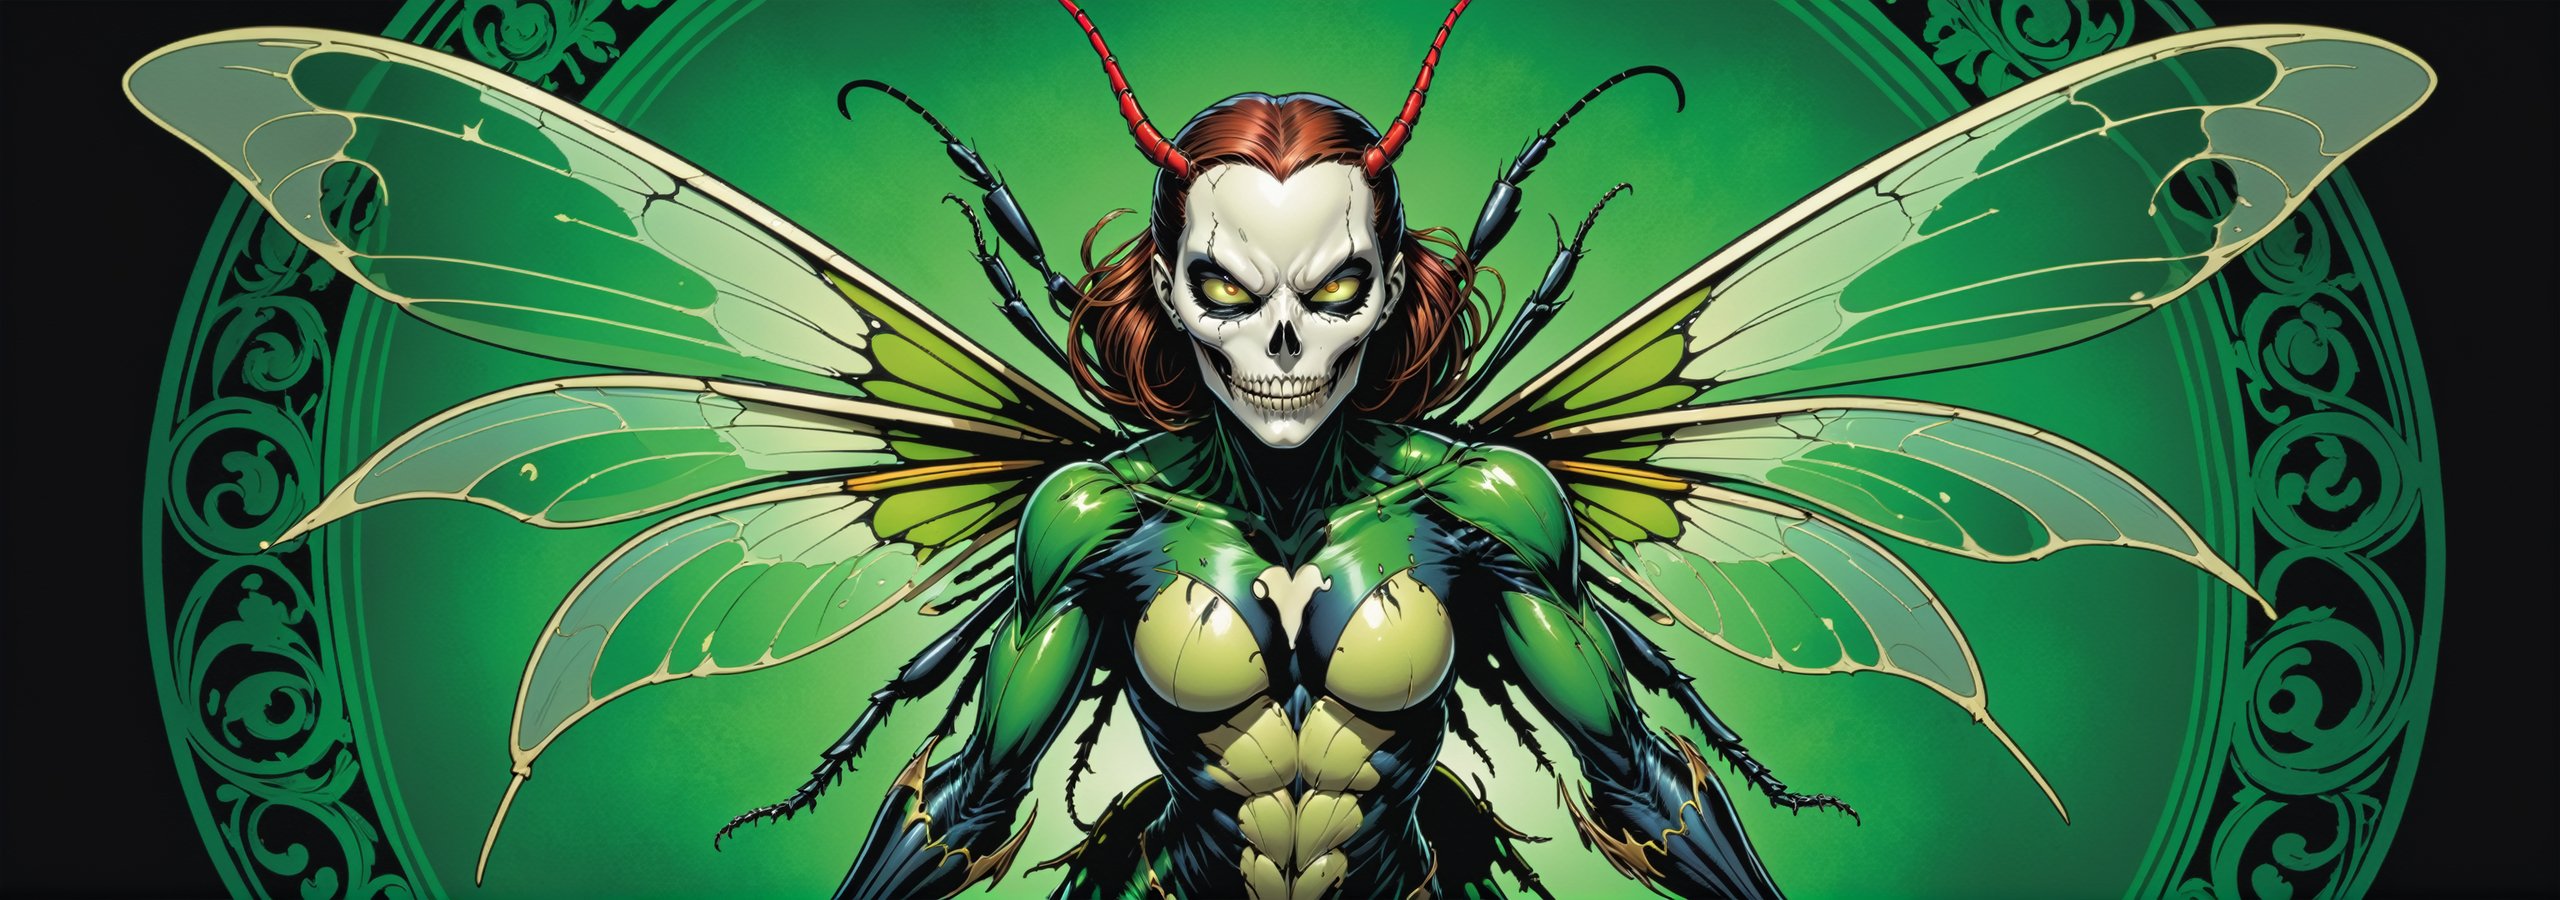 midshot, cel-shading style, centered image, ultra detailed illustration of the comic character ((Female Insect Spawn by Todd McFarlane)), posing, green, light green, brown, and black suit with a skull emblem, ((Full Body)), ((beetle, wings)),ornate background, (tetradic colors), inkpunk, ink lines, strong outlines, art by MSchiffer, bold traces, unframed, high contrast, cel-shaded, vector, 4k resolution, best quality, (chromatic aberration:1.8)